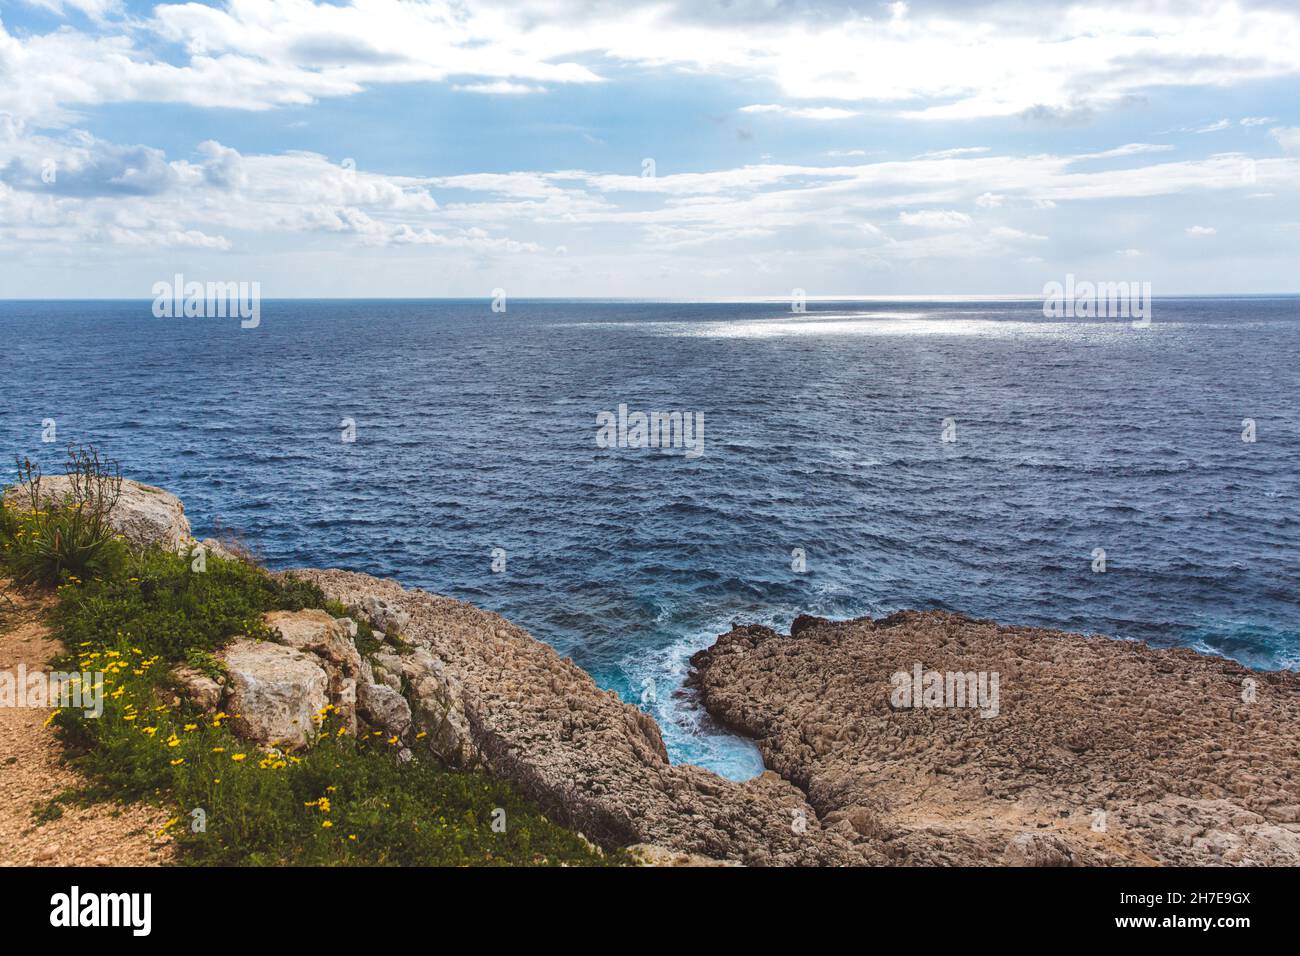 Seascape in Cyprus Ayia Napa, Cape Greco peninsula, picturesque view of Mediterranean Sea, Kavo Greco, national forest park Banque D'Images